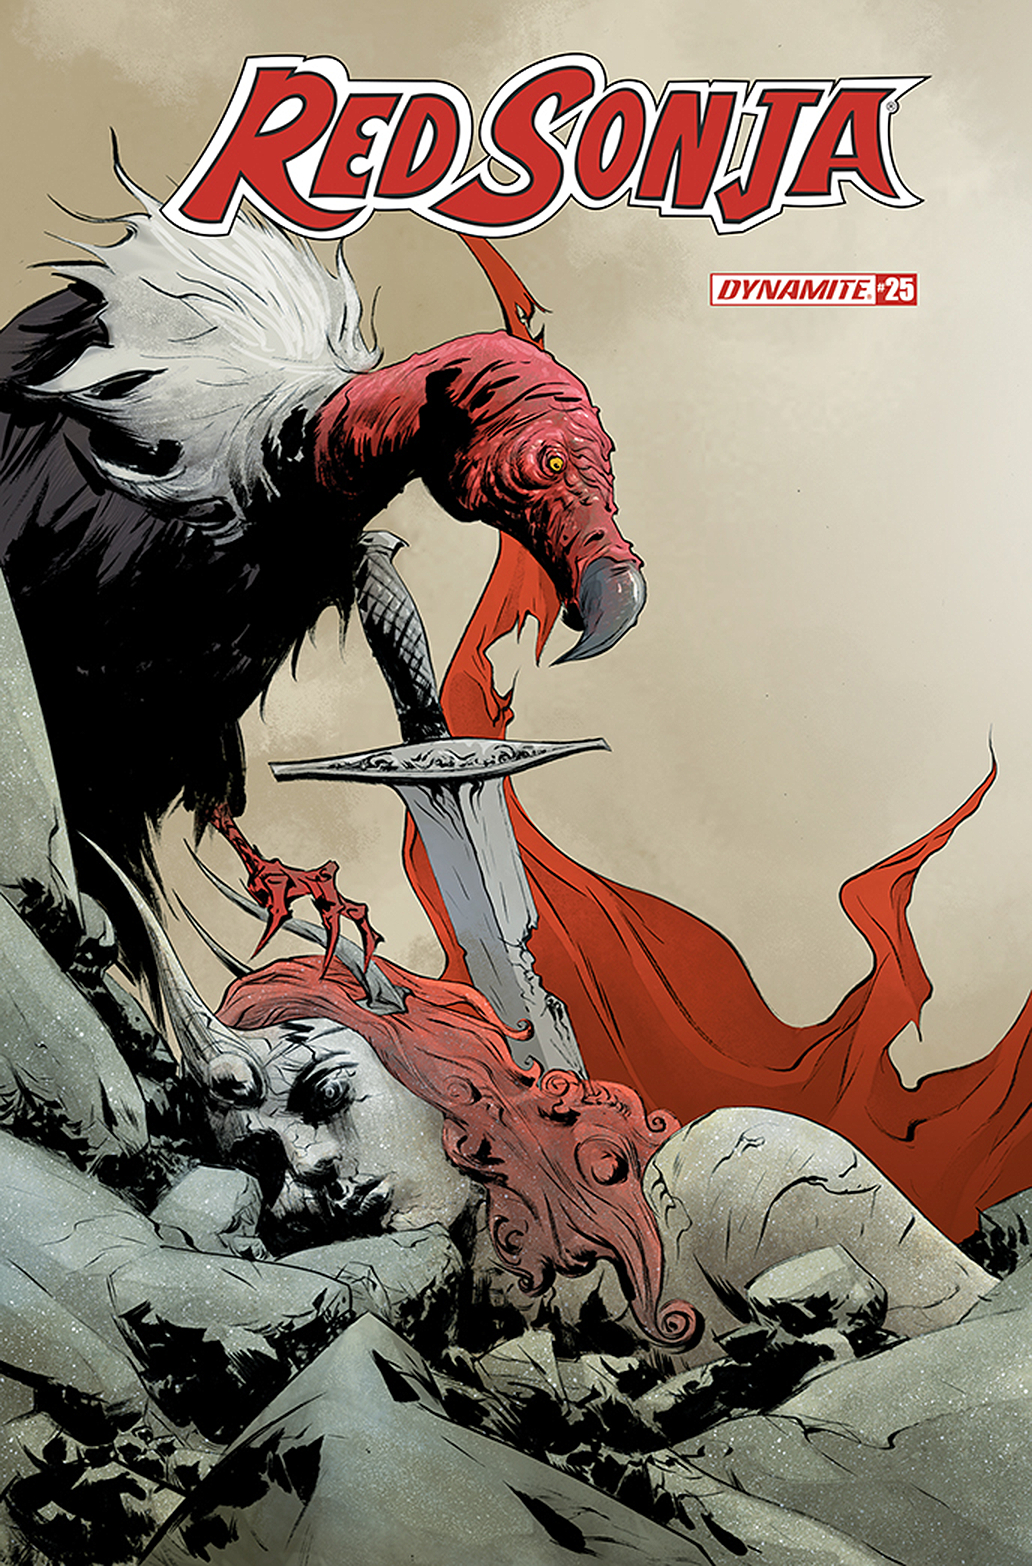 Red Sonja #25 Cover A Lee